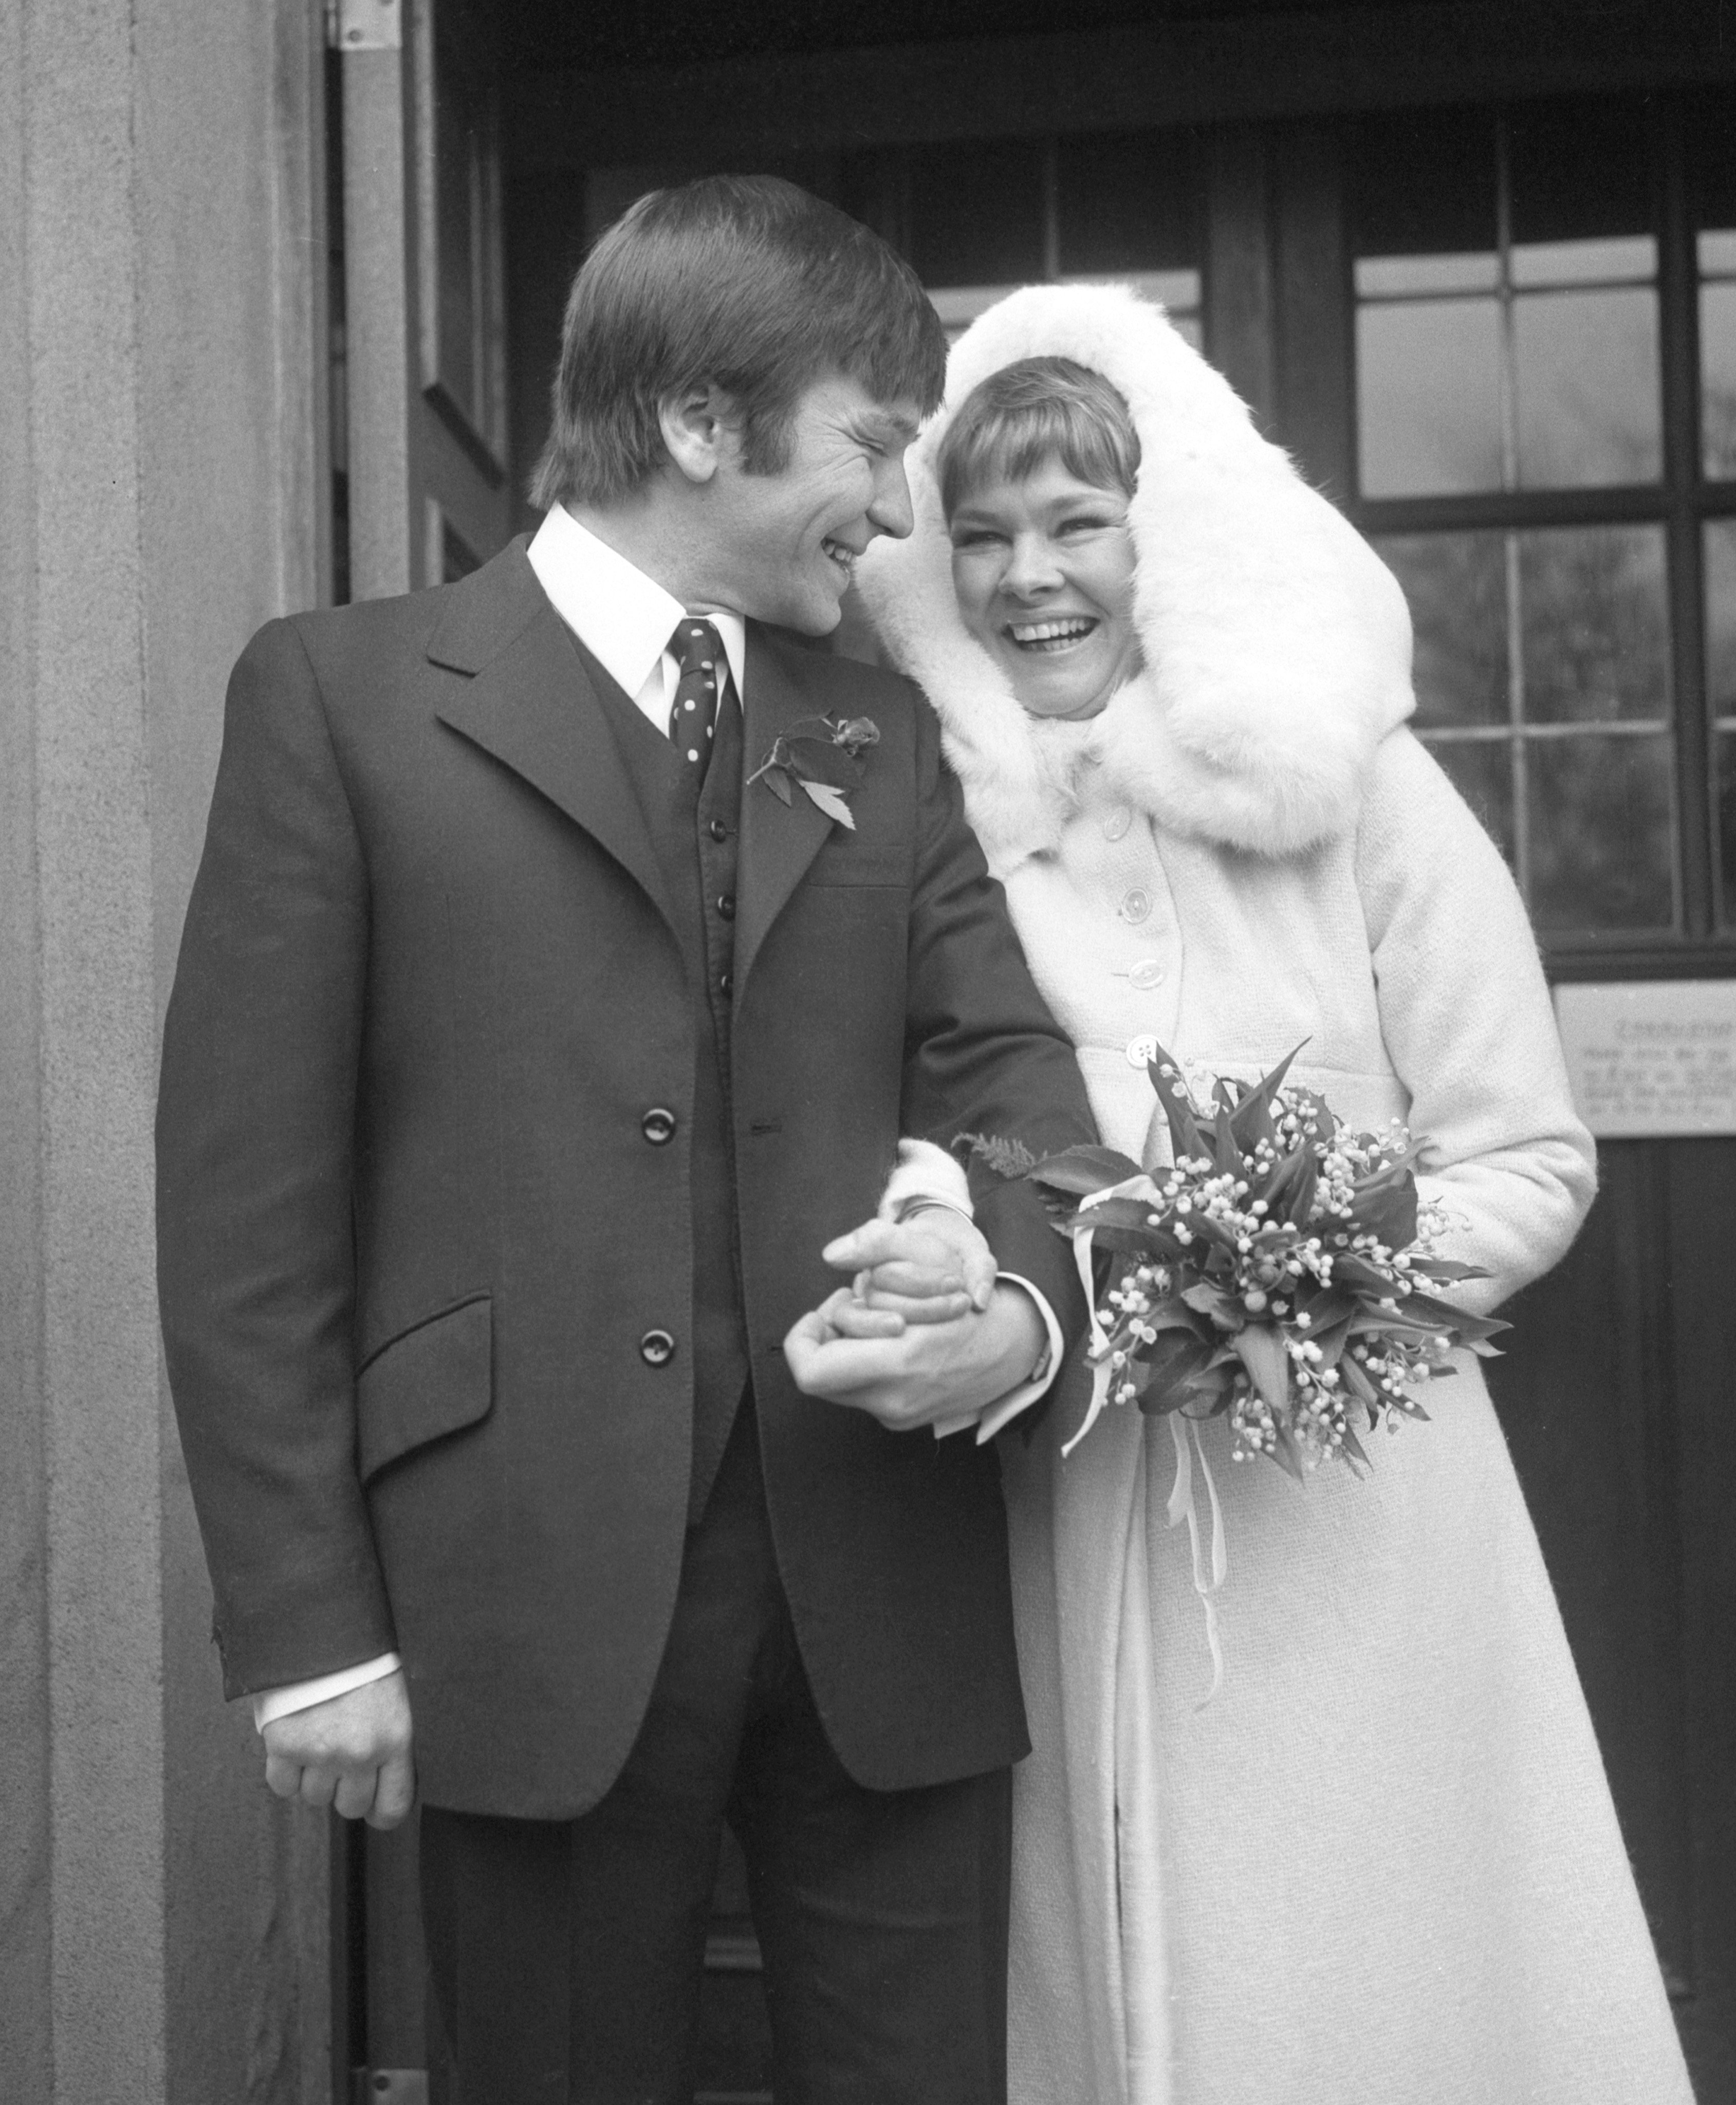 Judi Dench and Michael Williams on their wedding day | Source: Getty Images